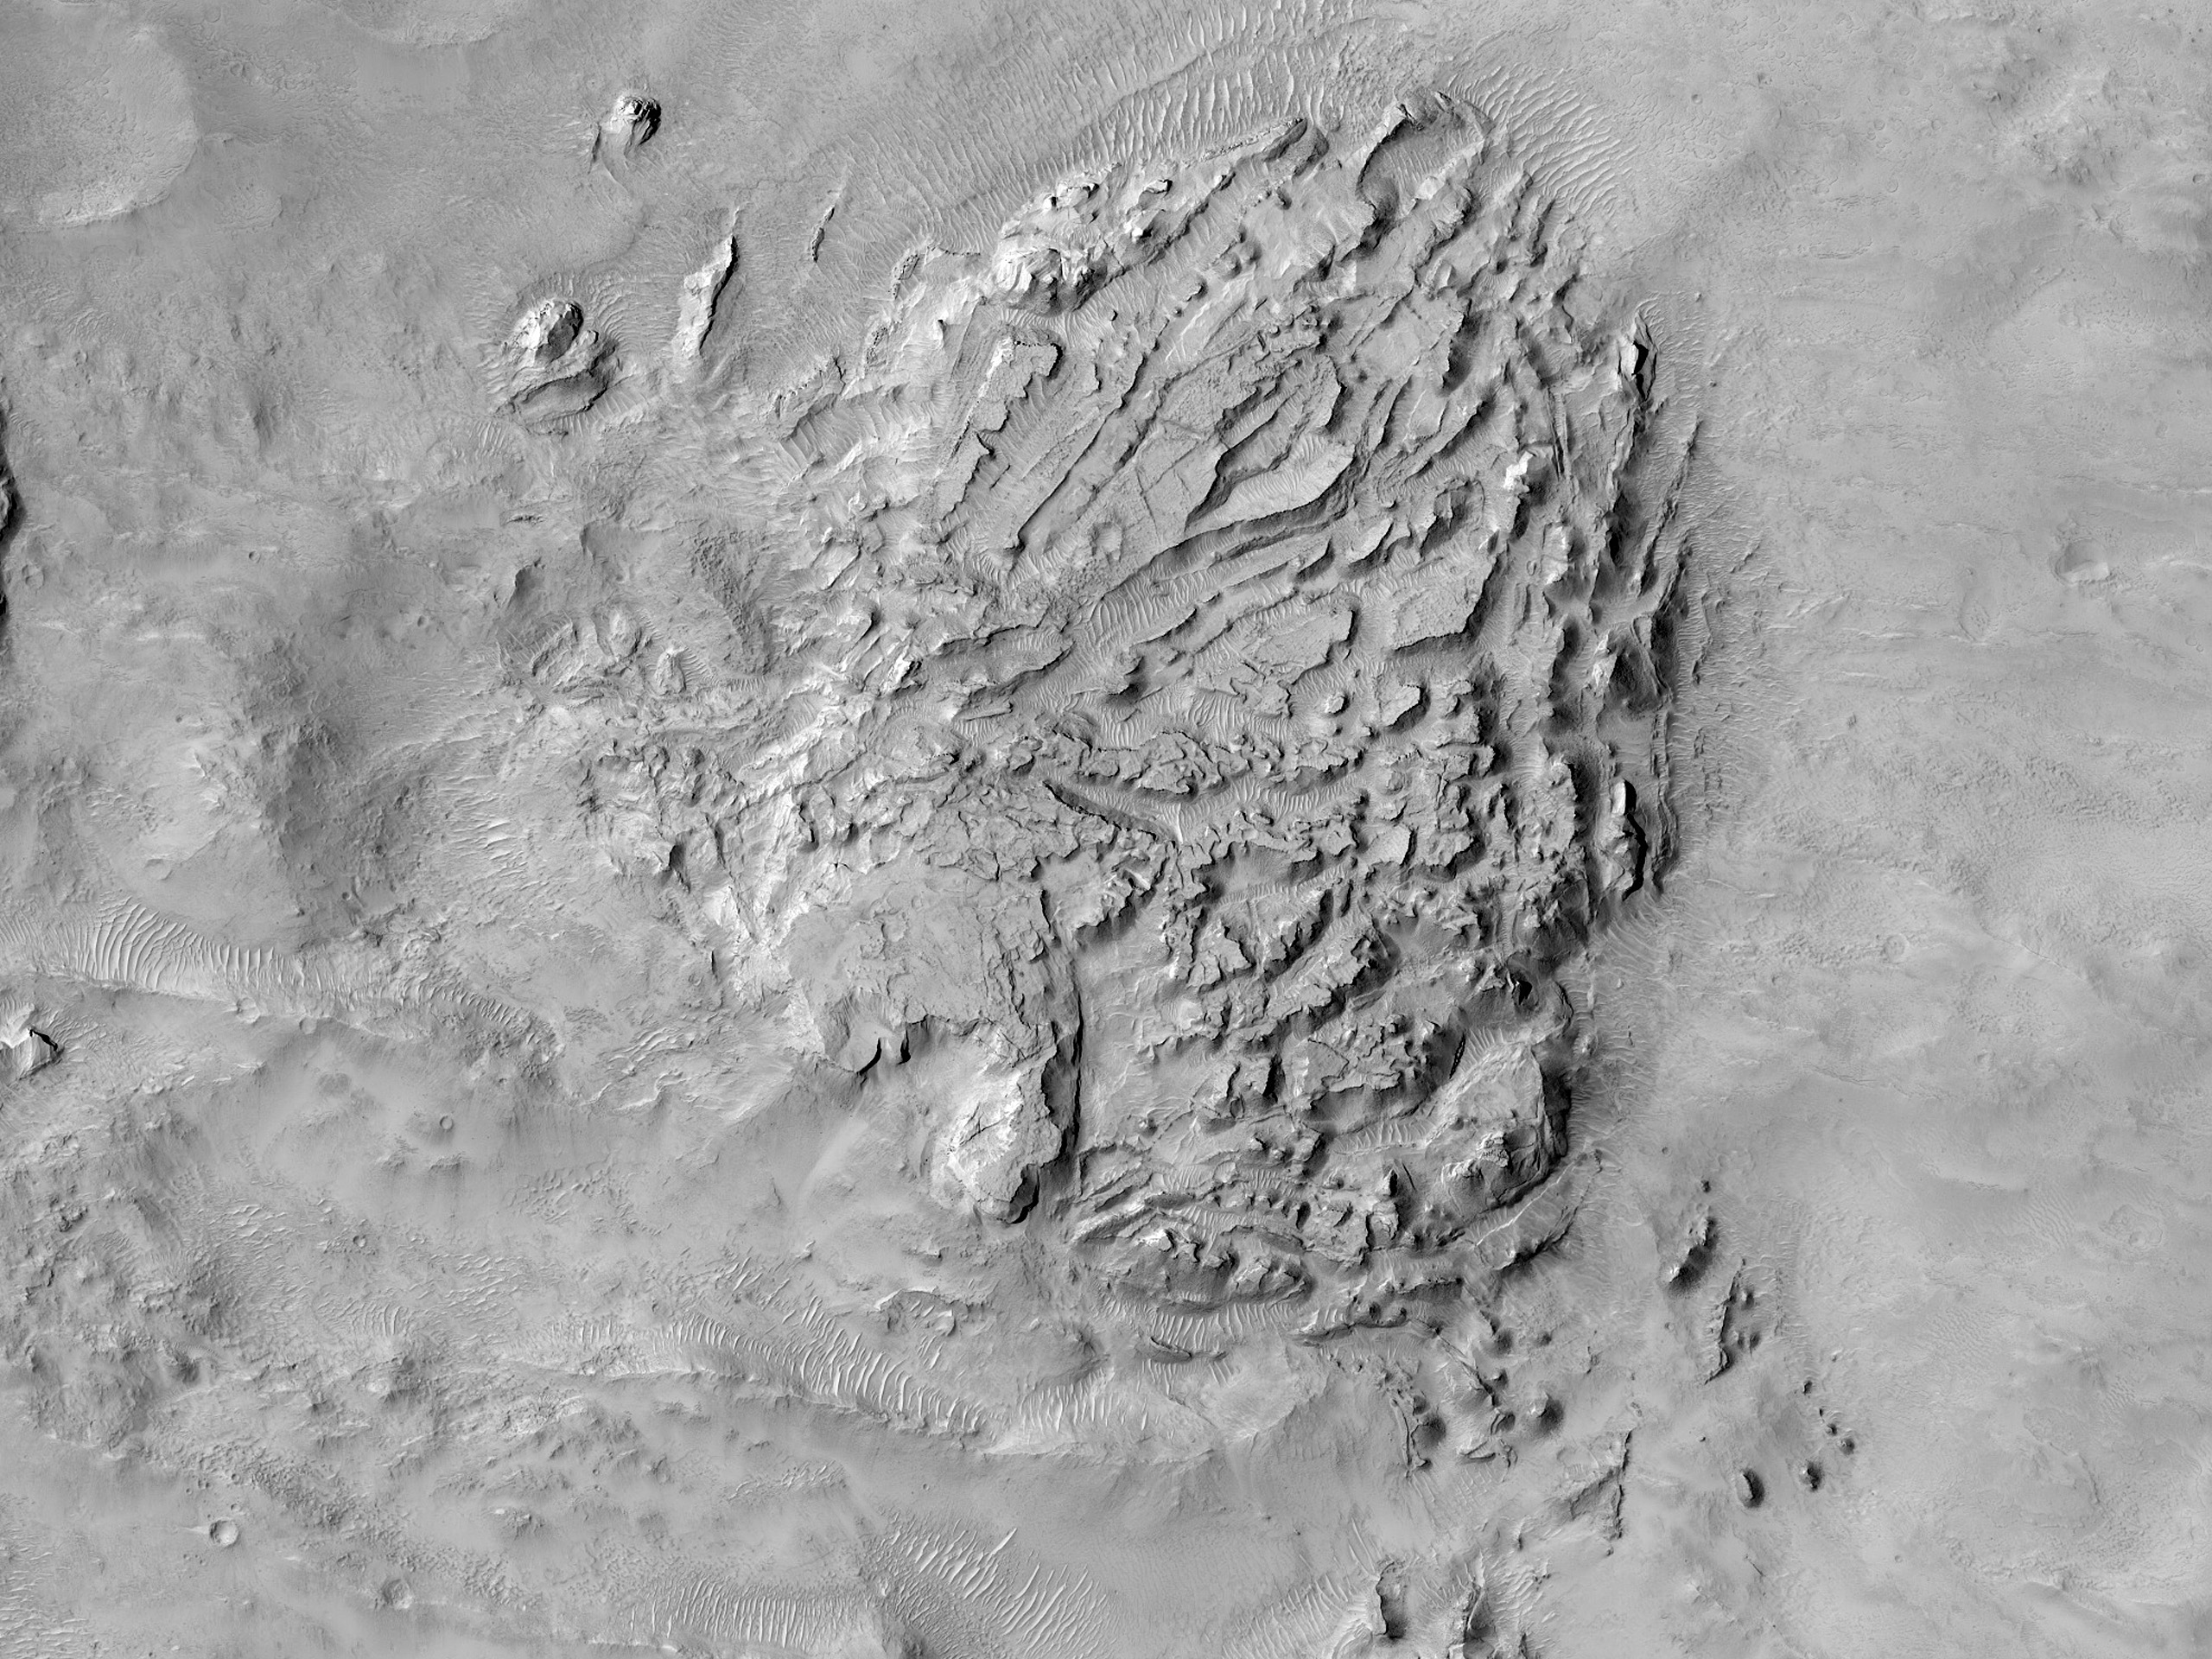 Rounded Mounds in Northern Arabia Terra